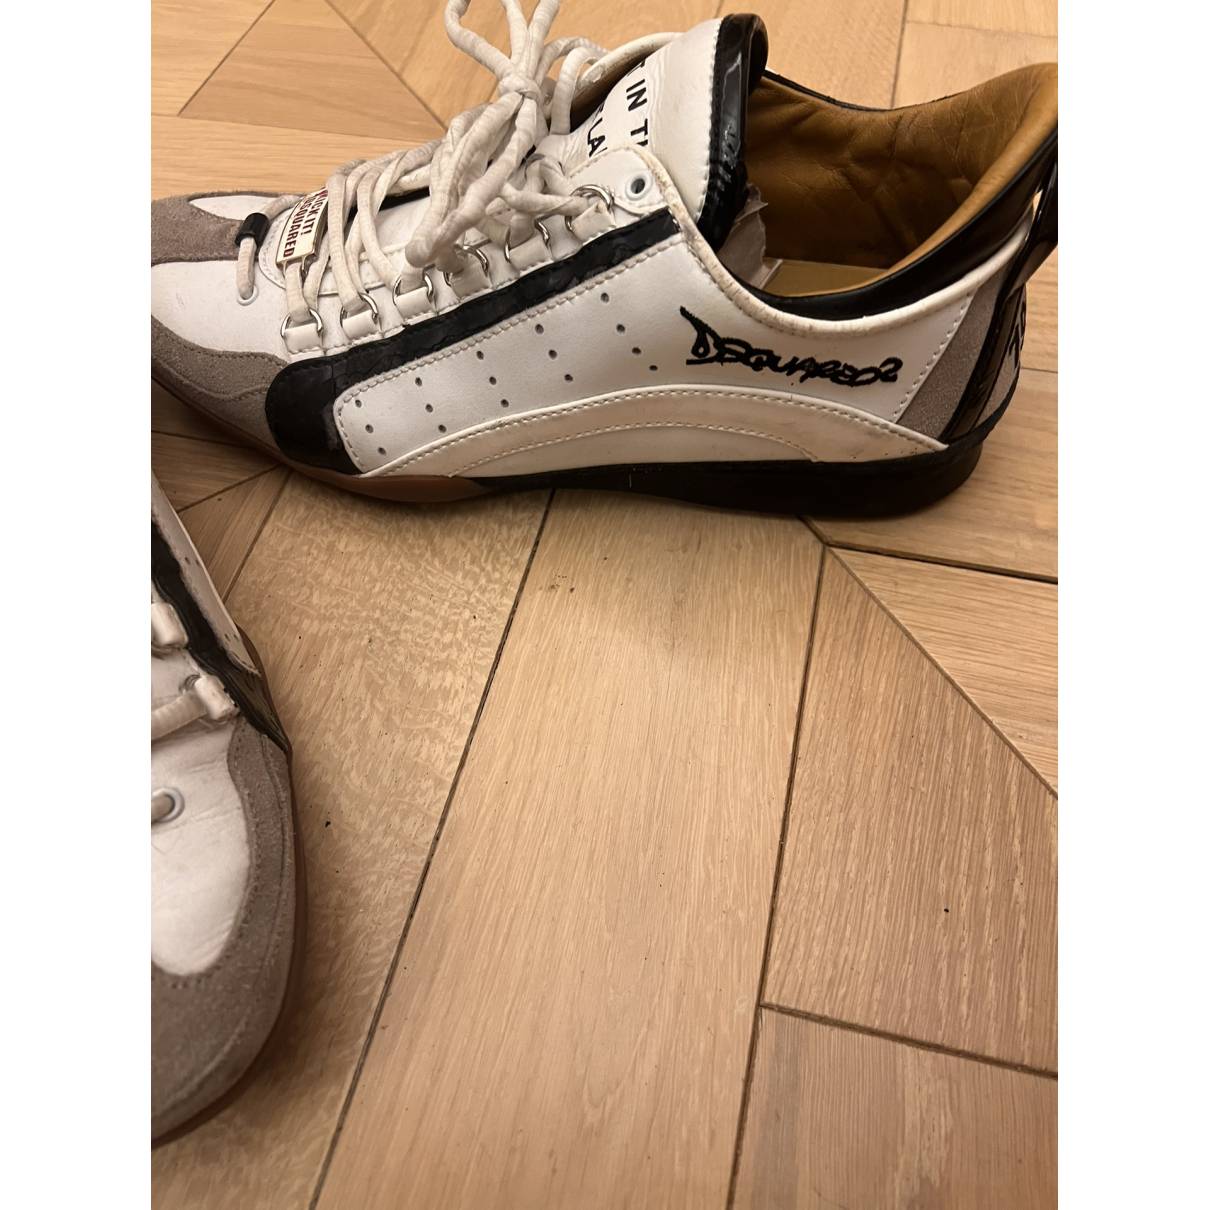 Buy Dsquared2 551 leather low trainers online